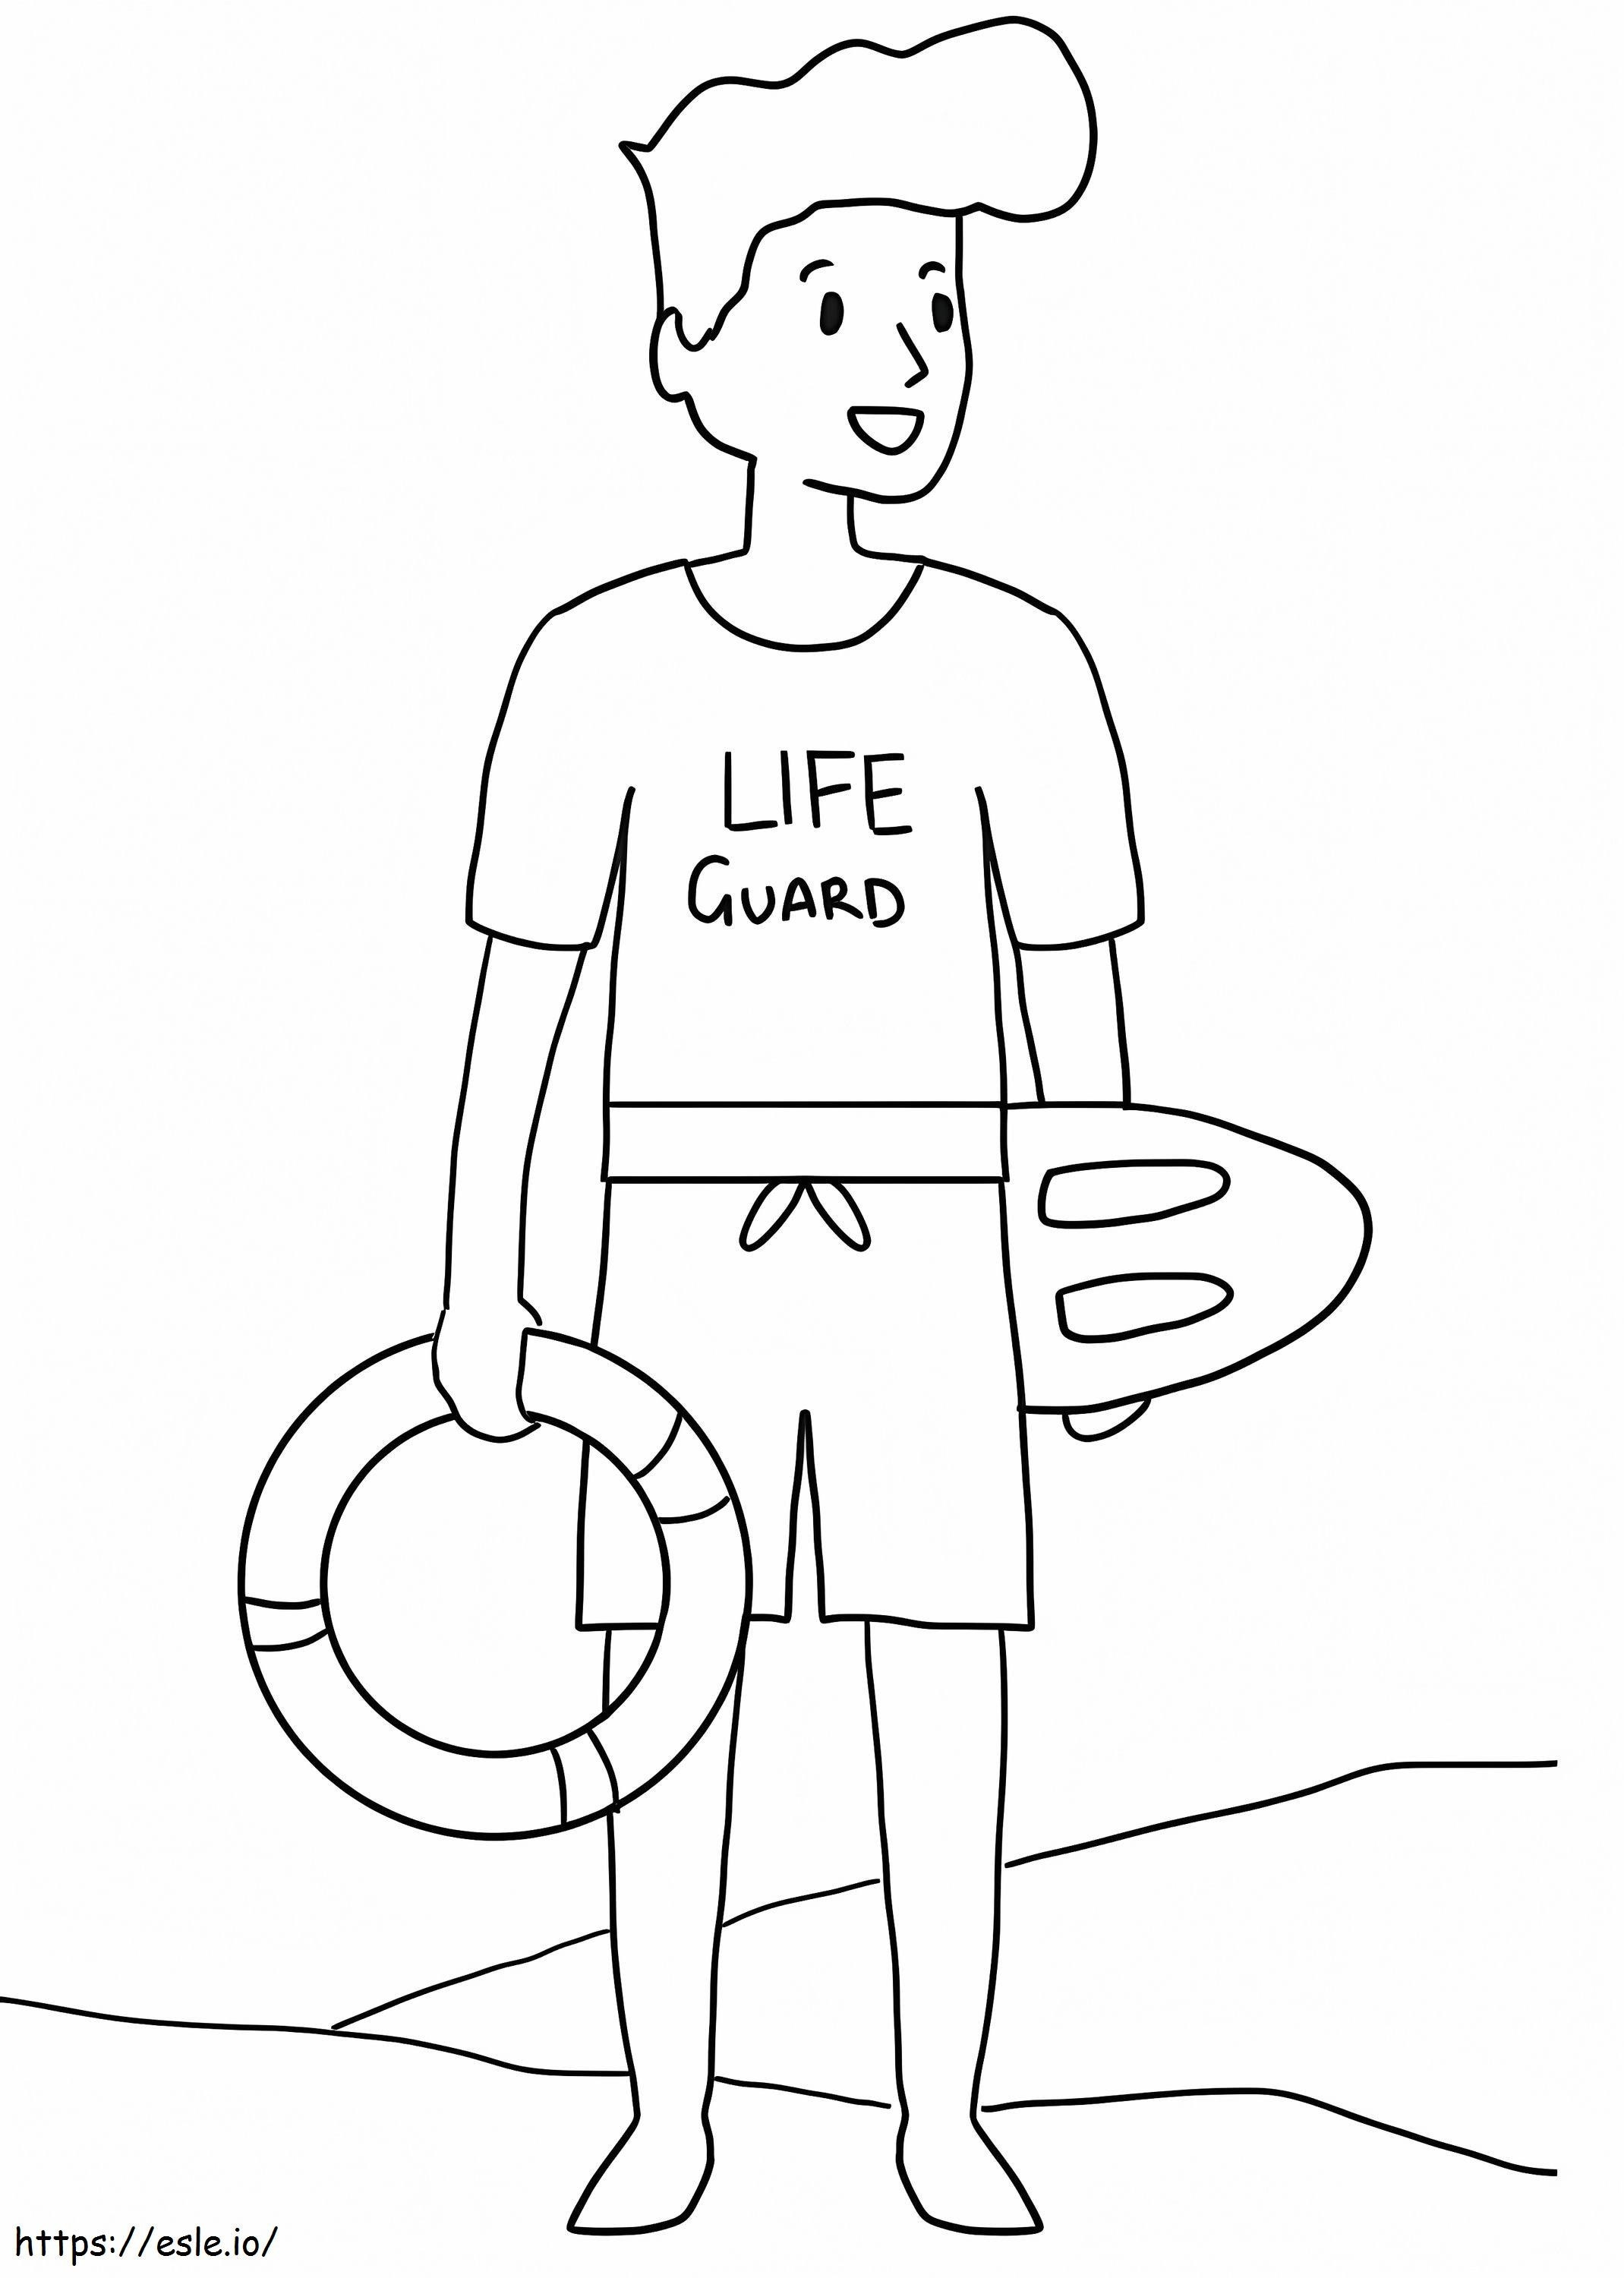 Young Lifeguard coloring page